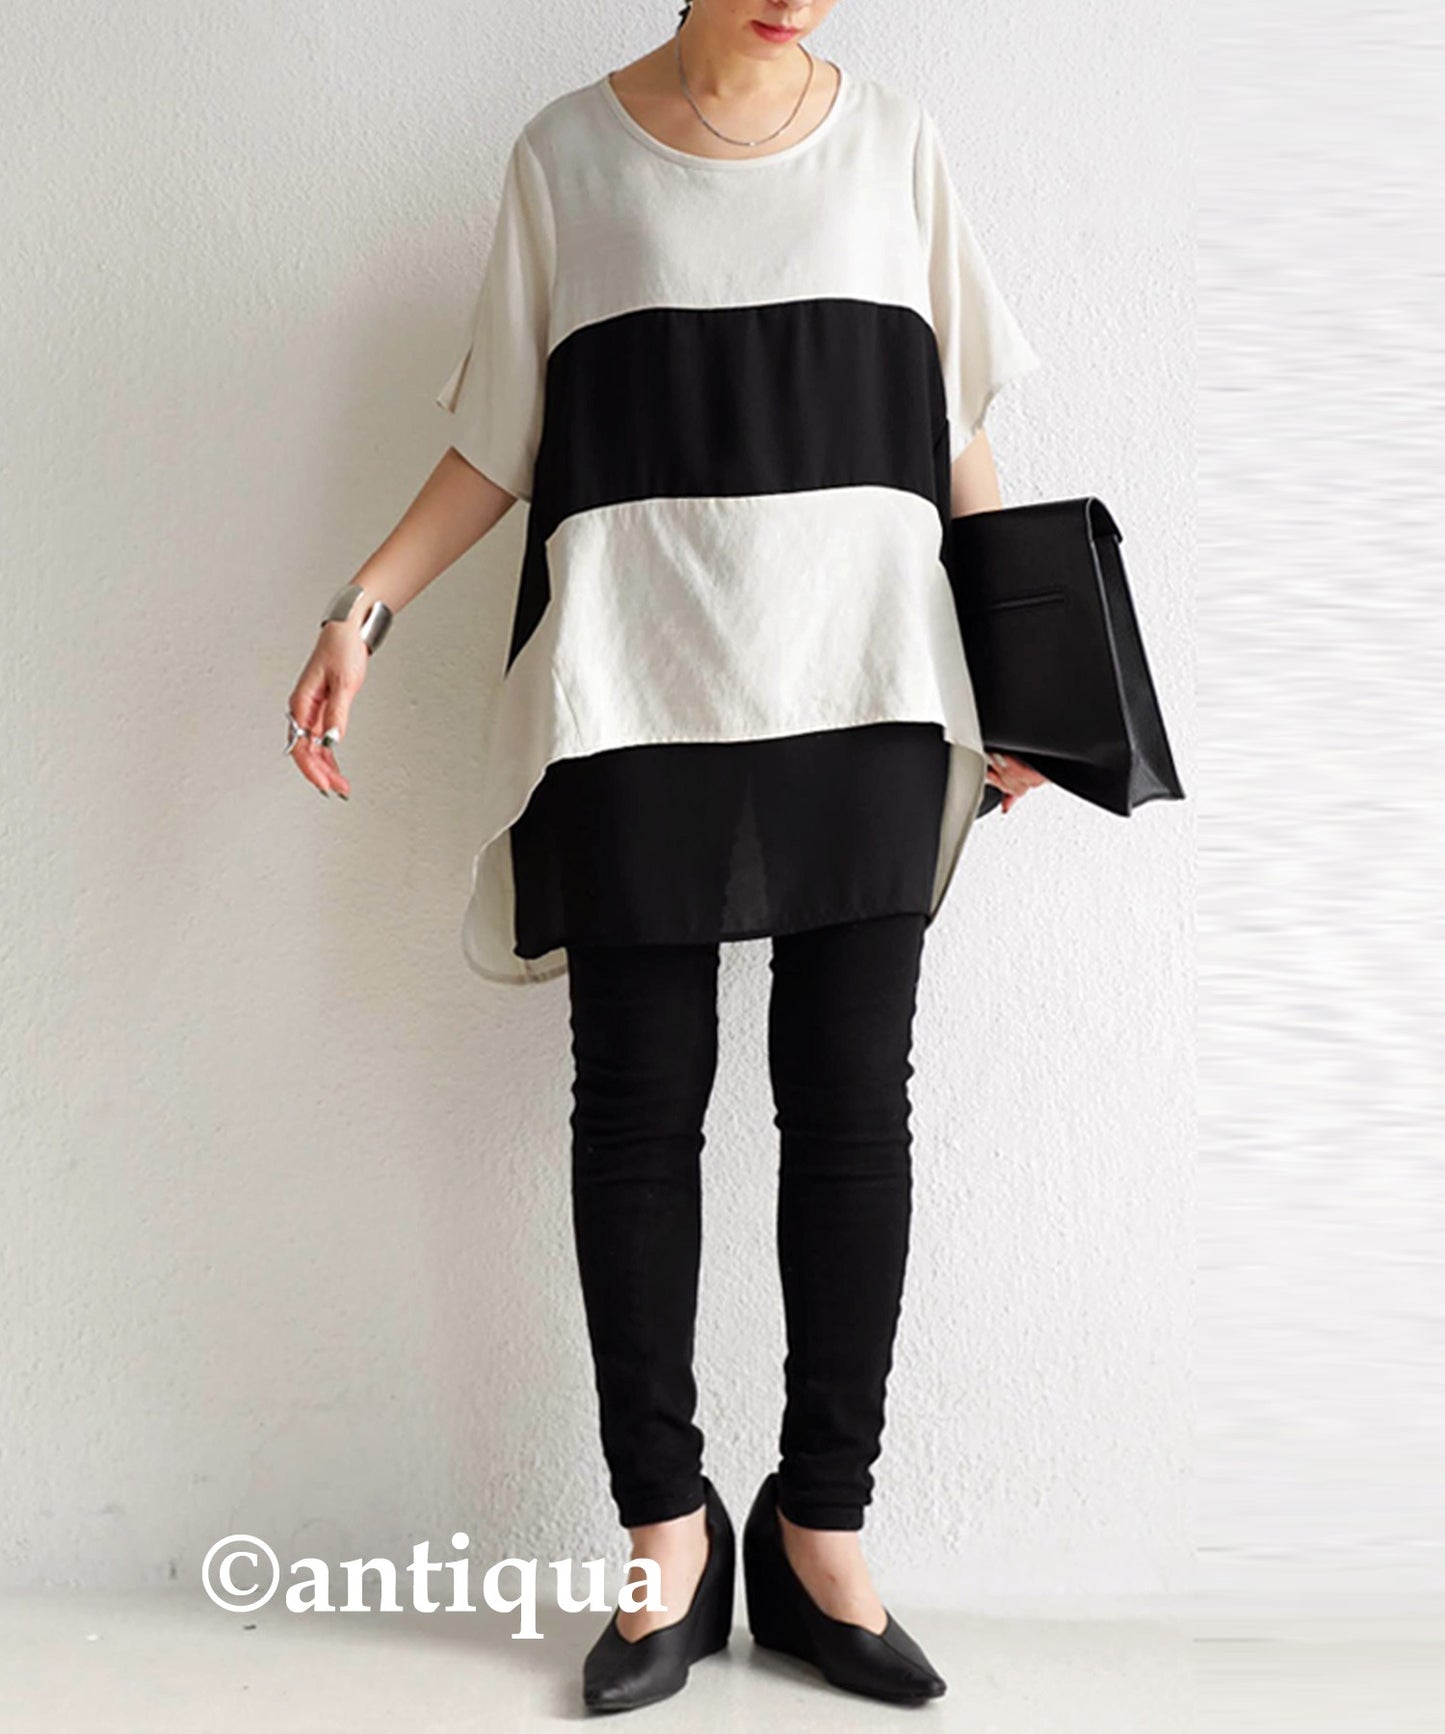 Chiffon switching Unique design Tops Ladies Tops Short Sleeve